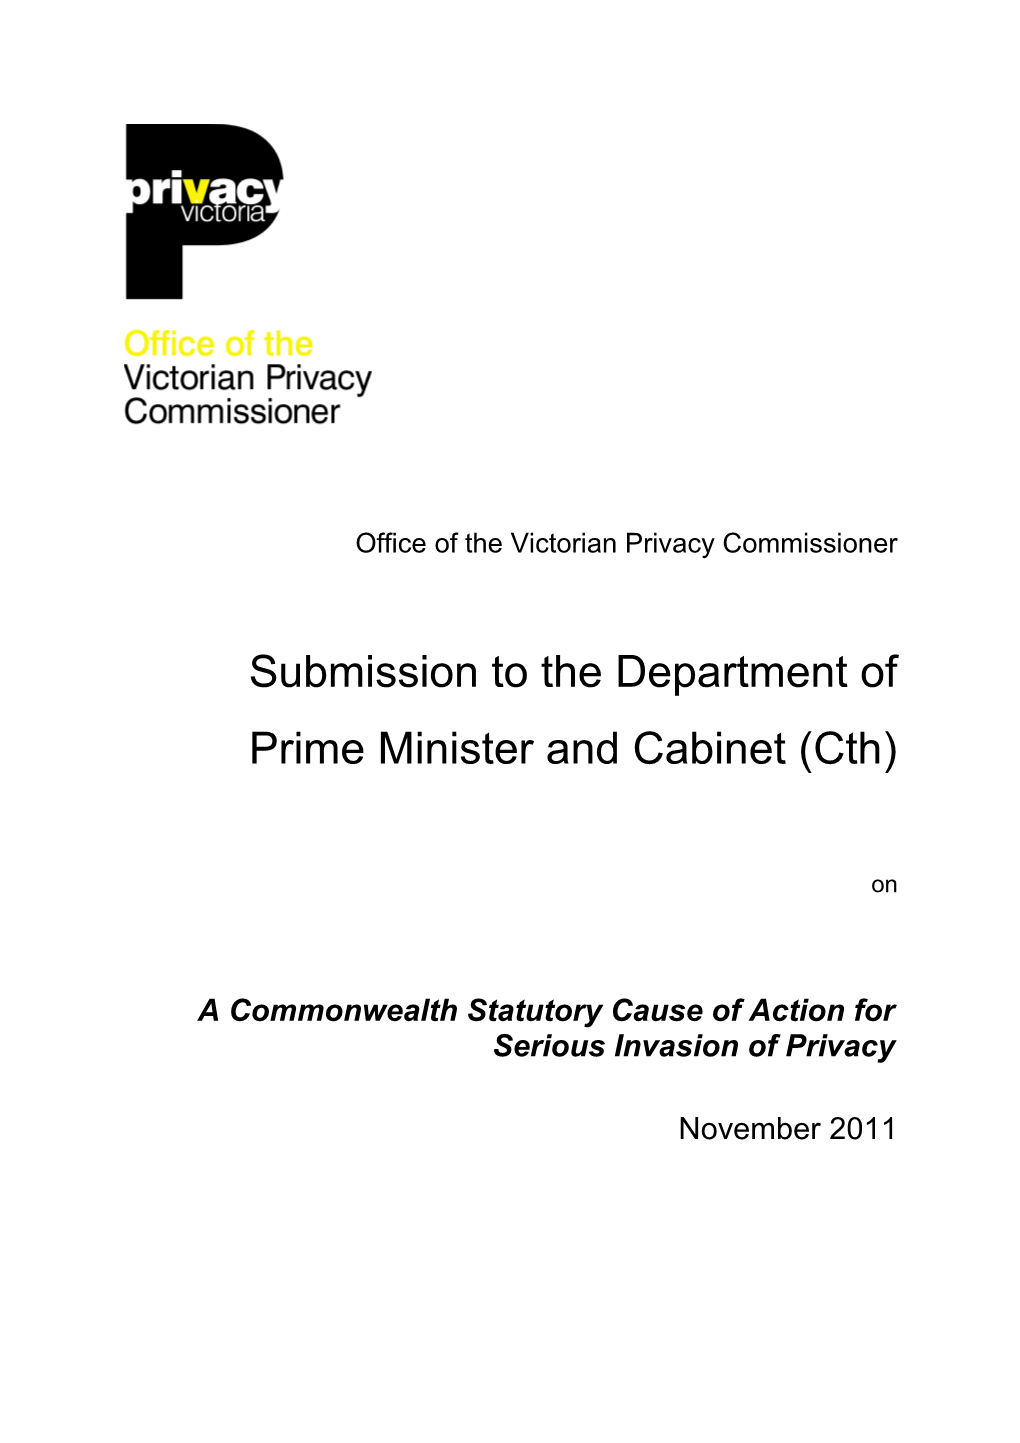 Submission - Right to Sue for Serious Invasion of Personal Privacy - Office of the Victorian